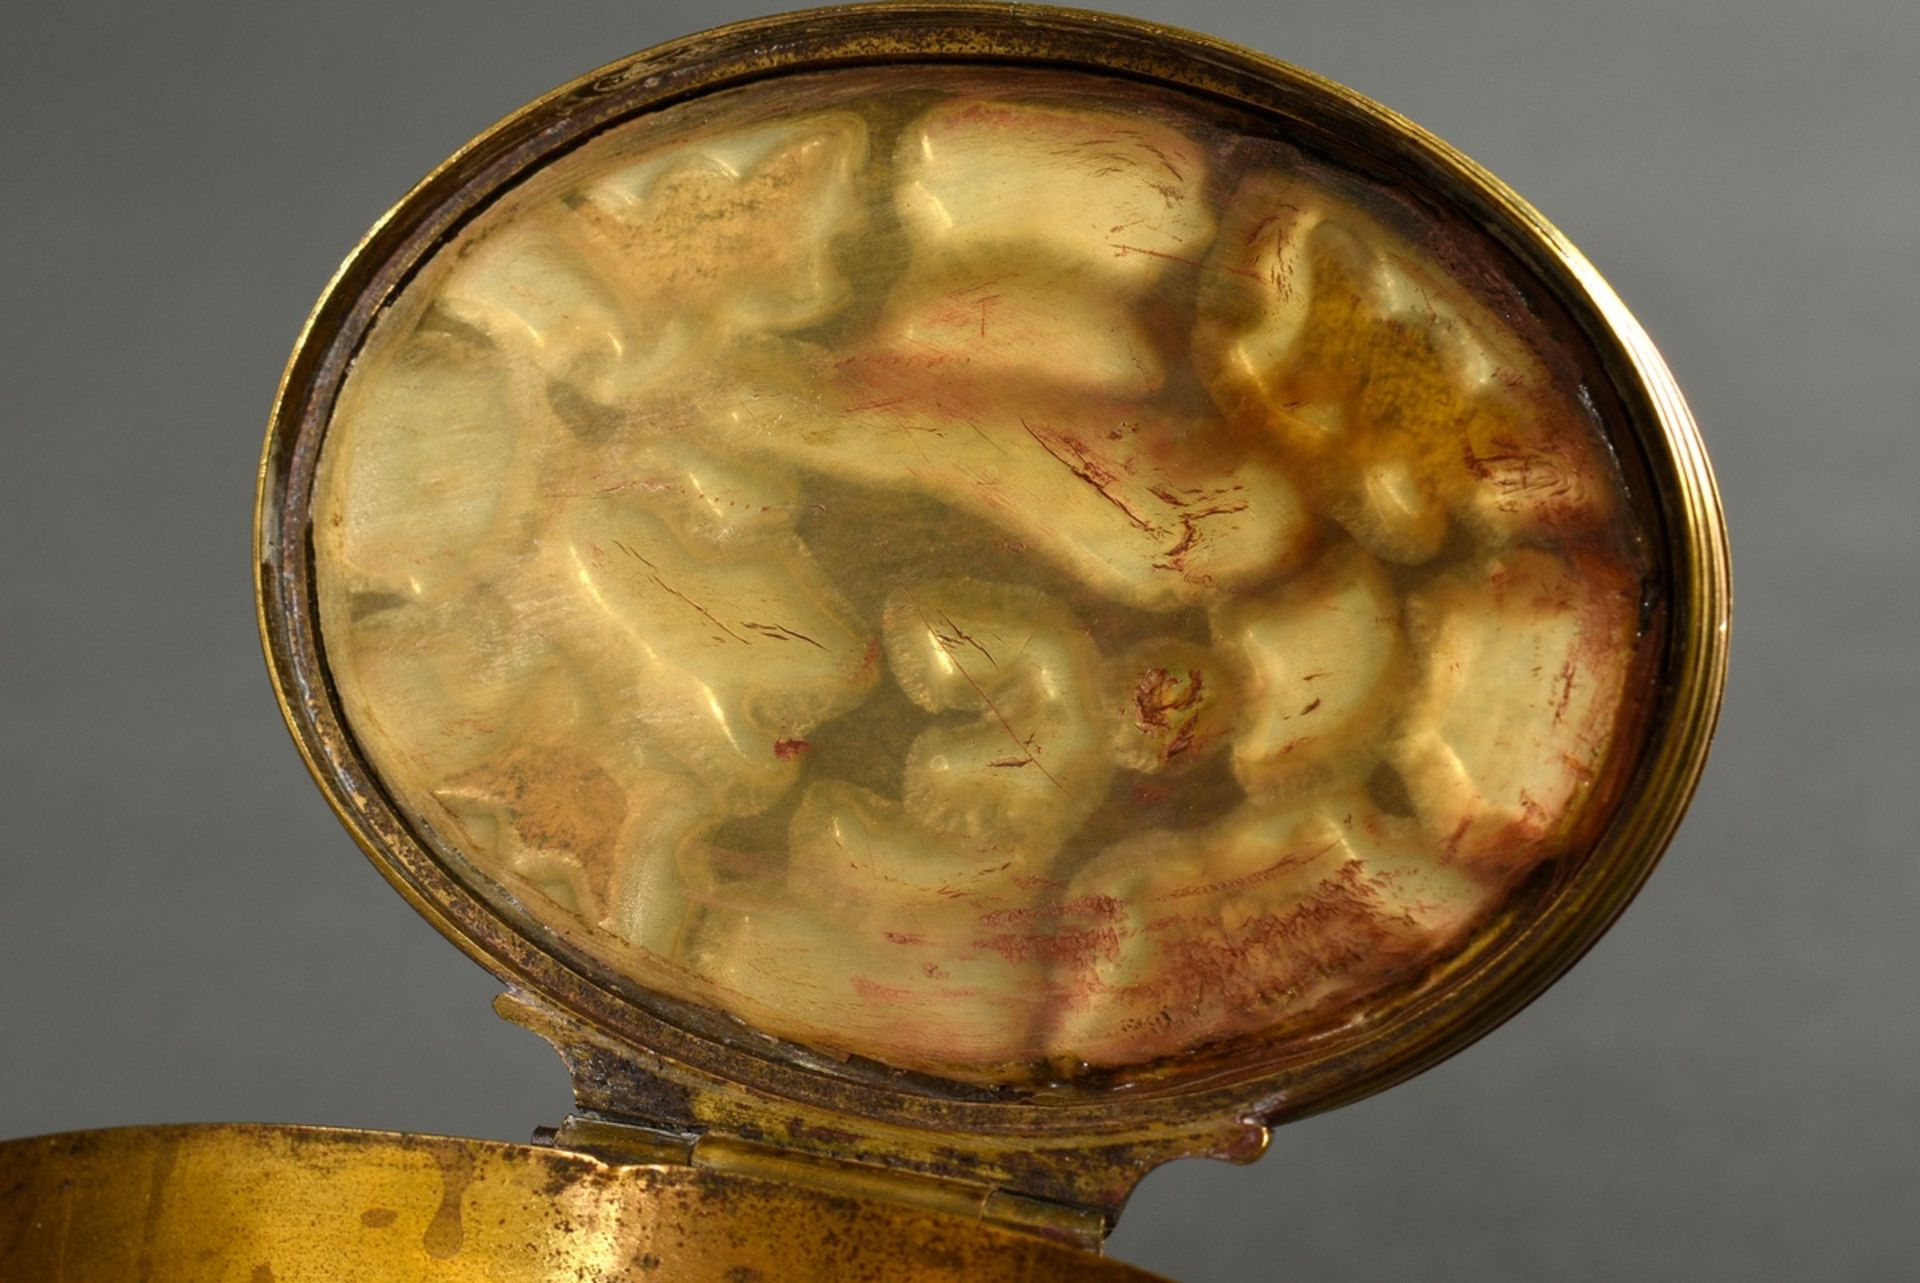 Oval brass snuff box with horn and mother-of-pearl inlays in the lid "Leaping Stag", England approx - Image 4 of 5